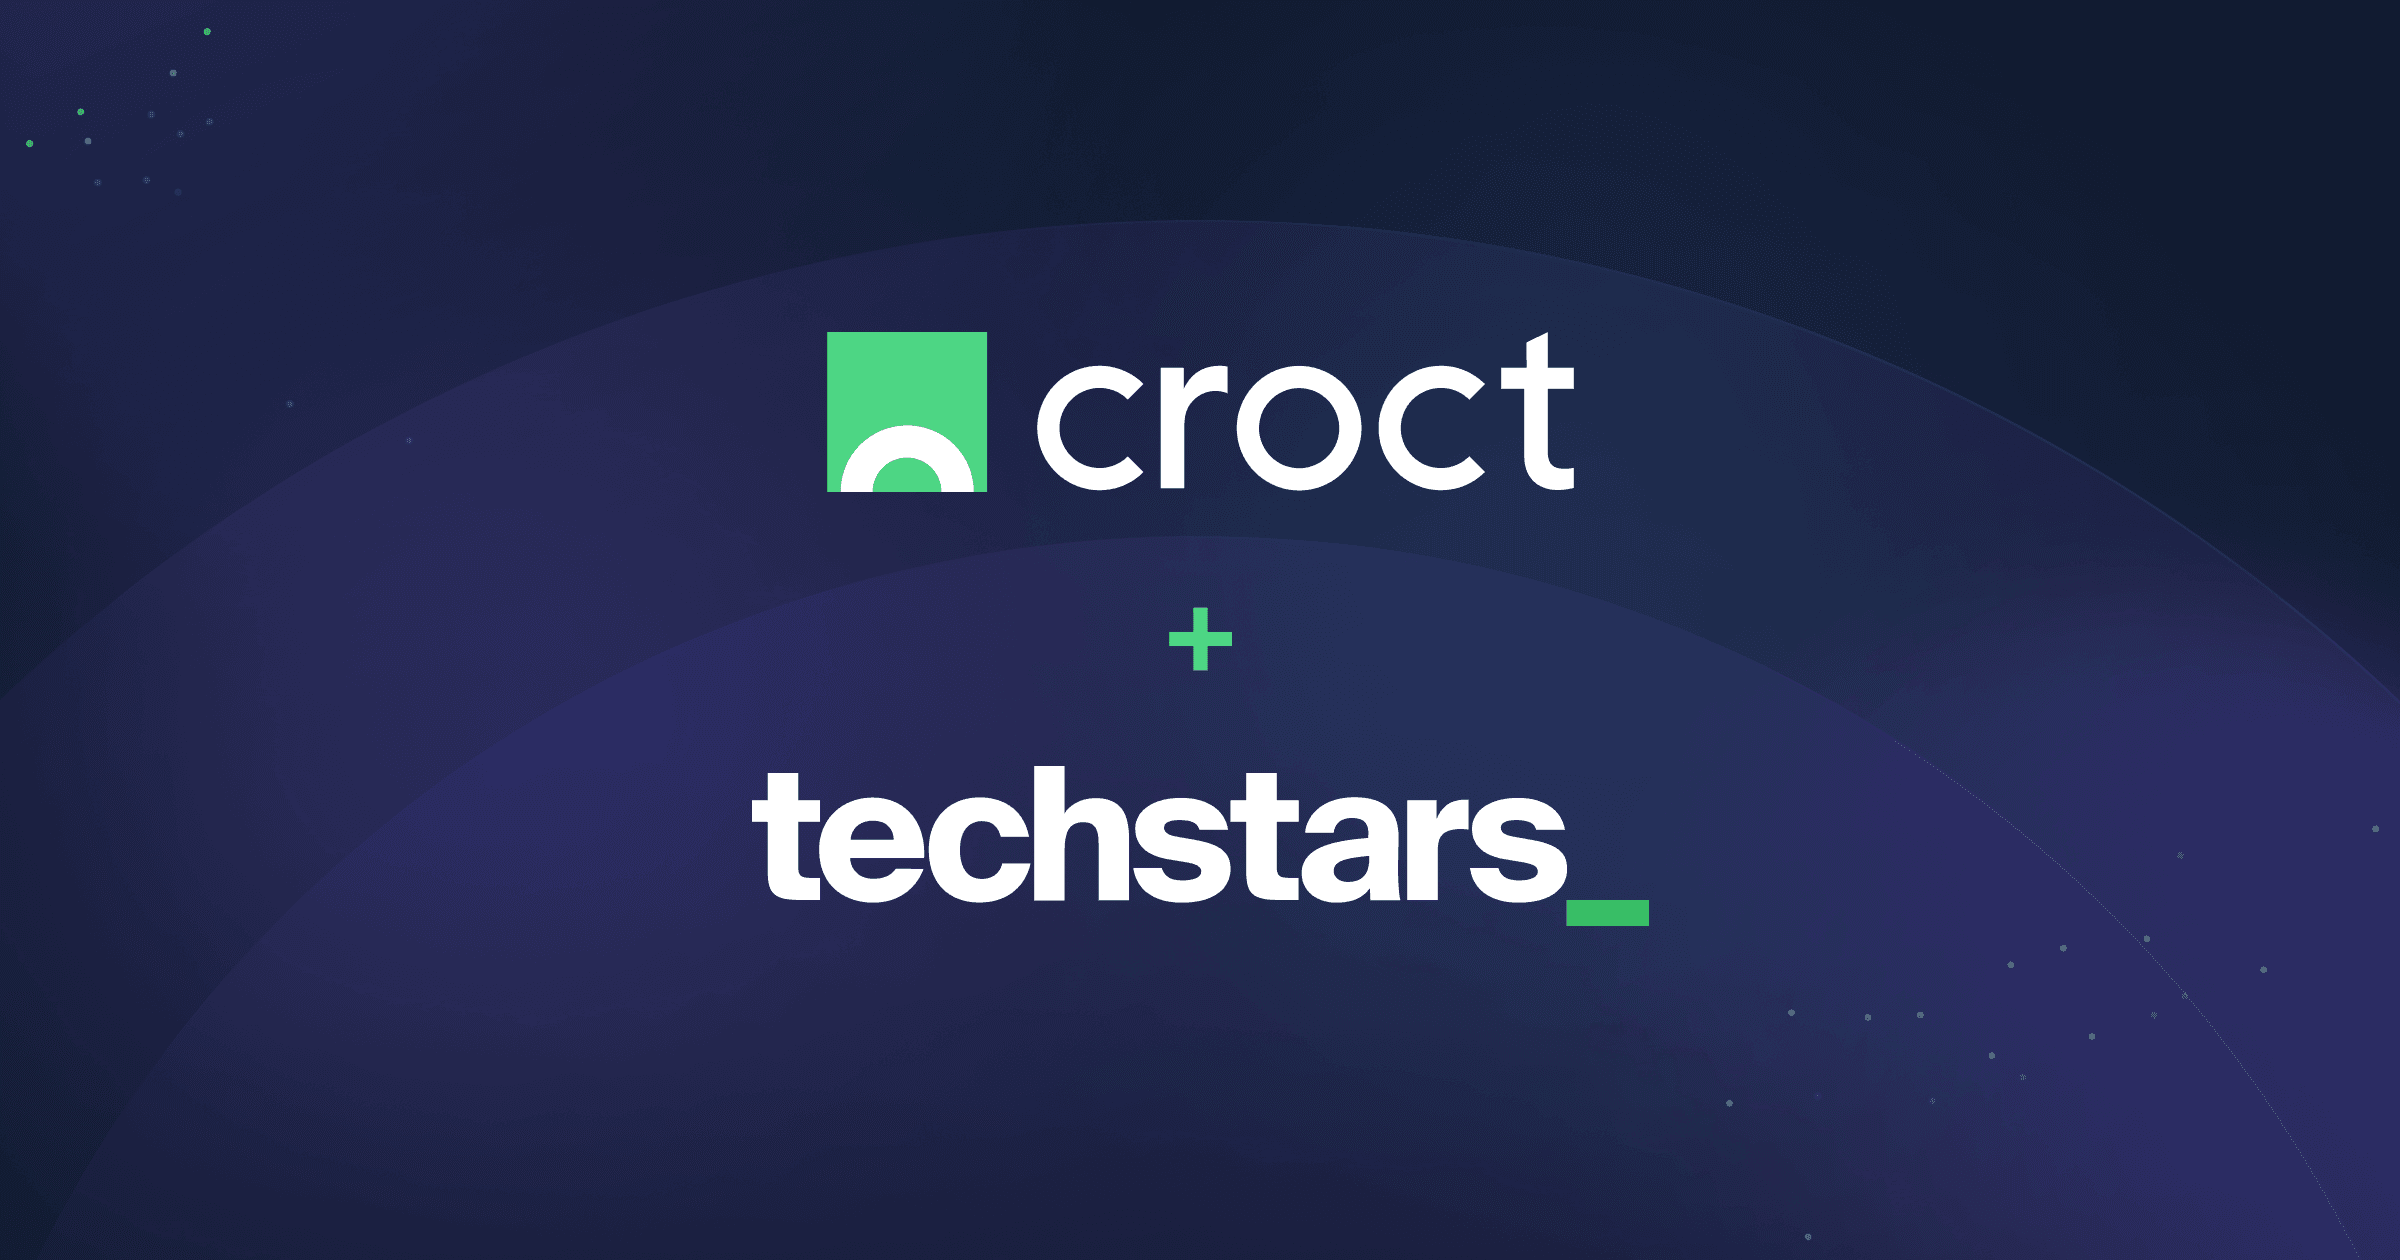 Image with dark back ground containing text that reads "Croct + techstars"